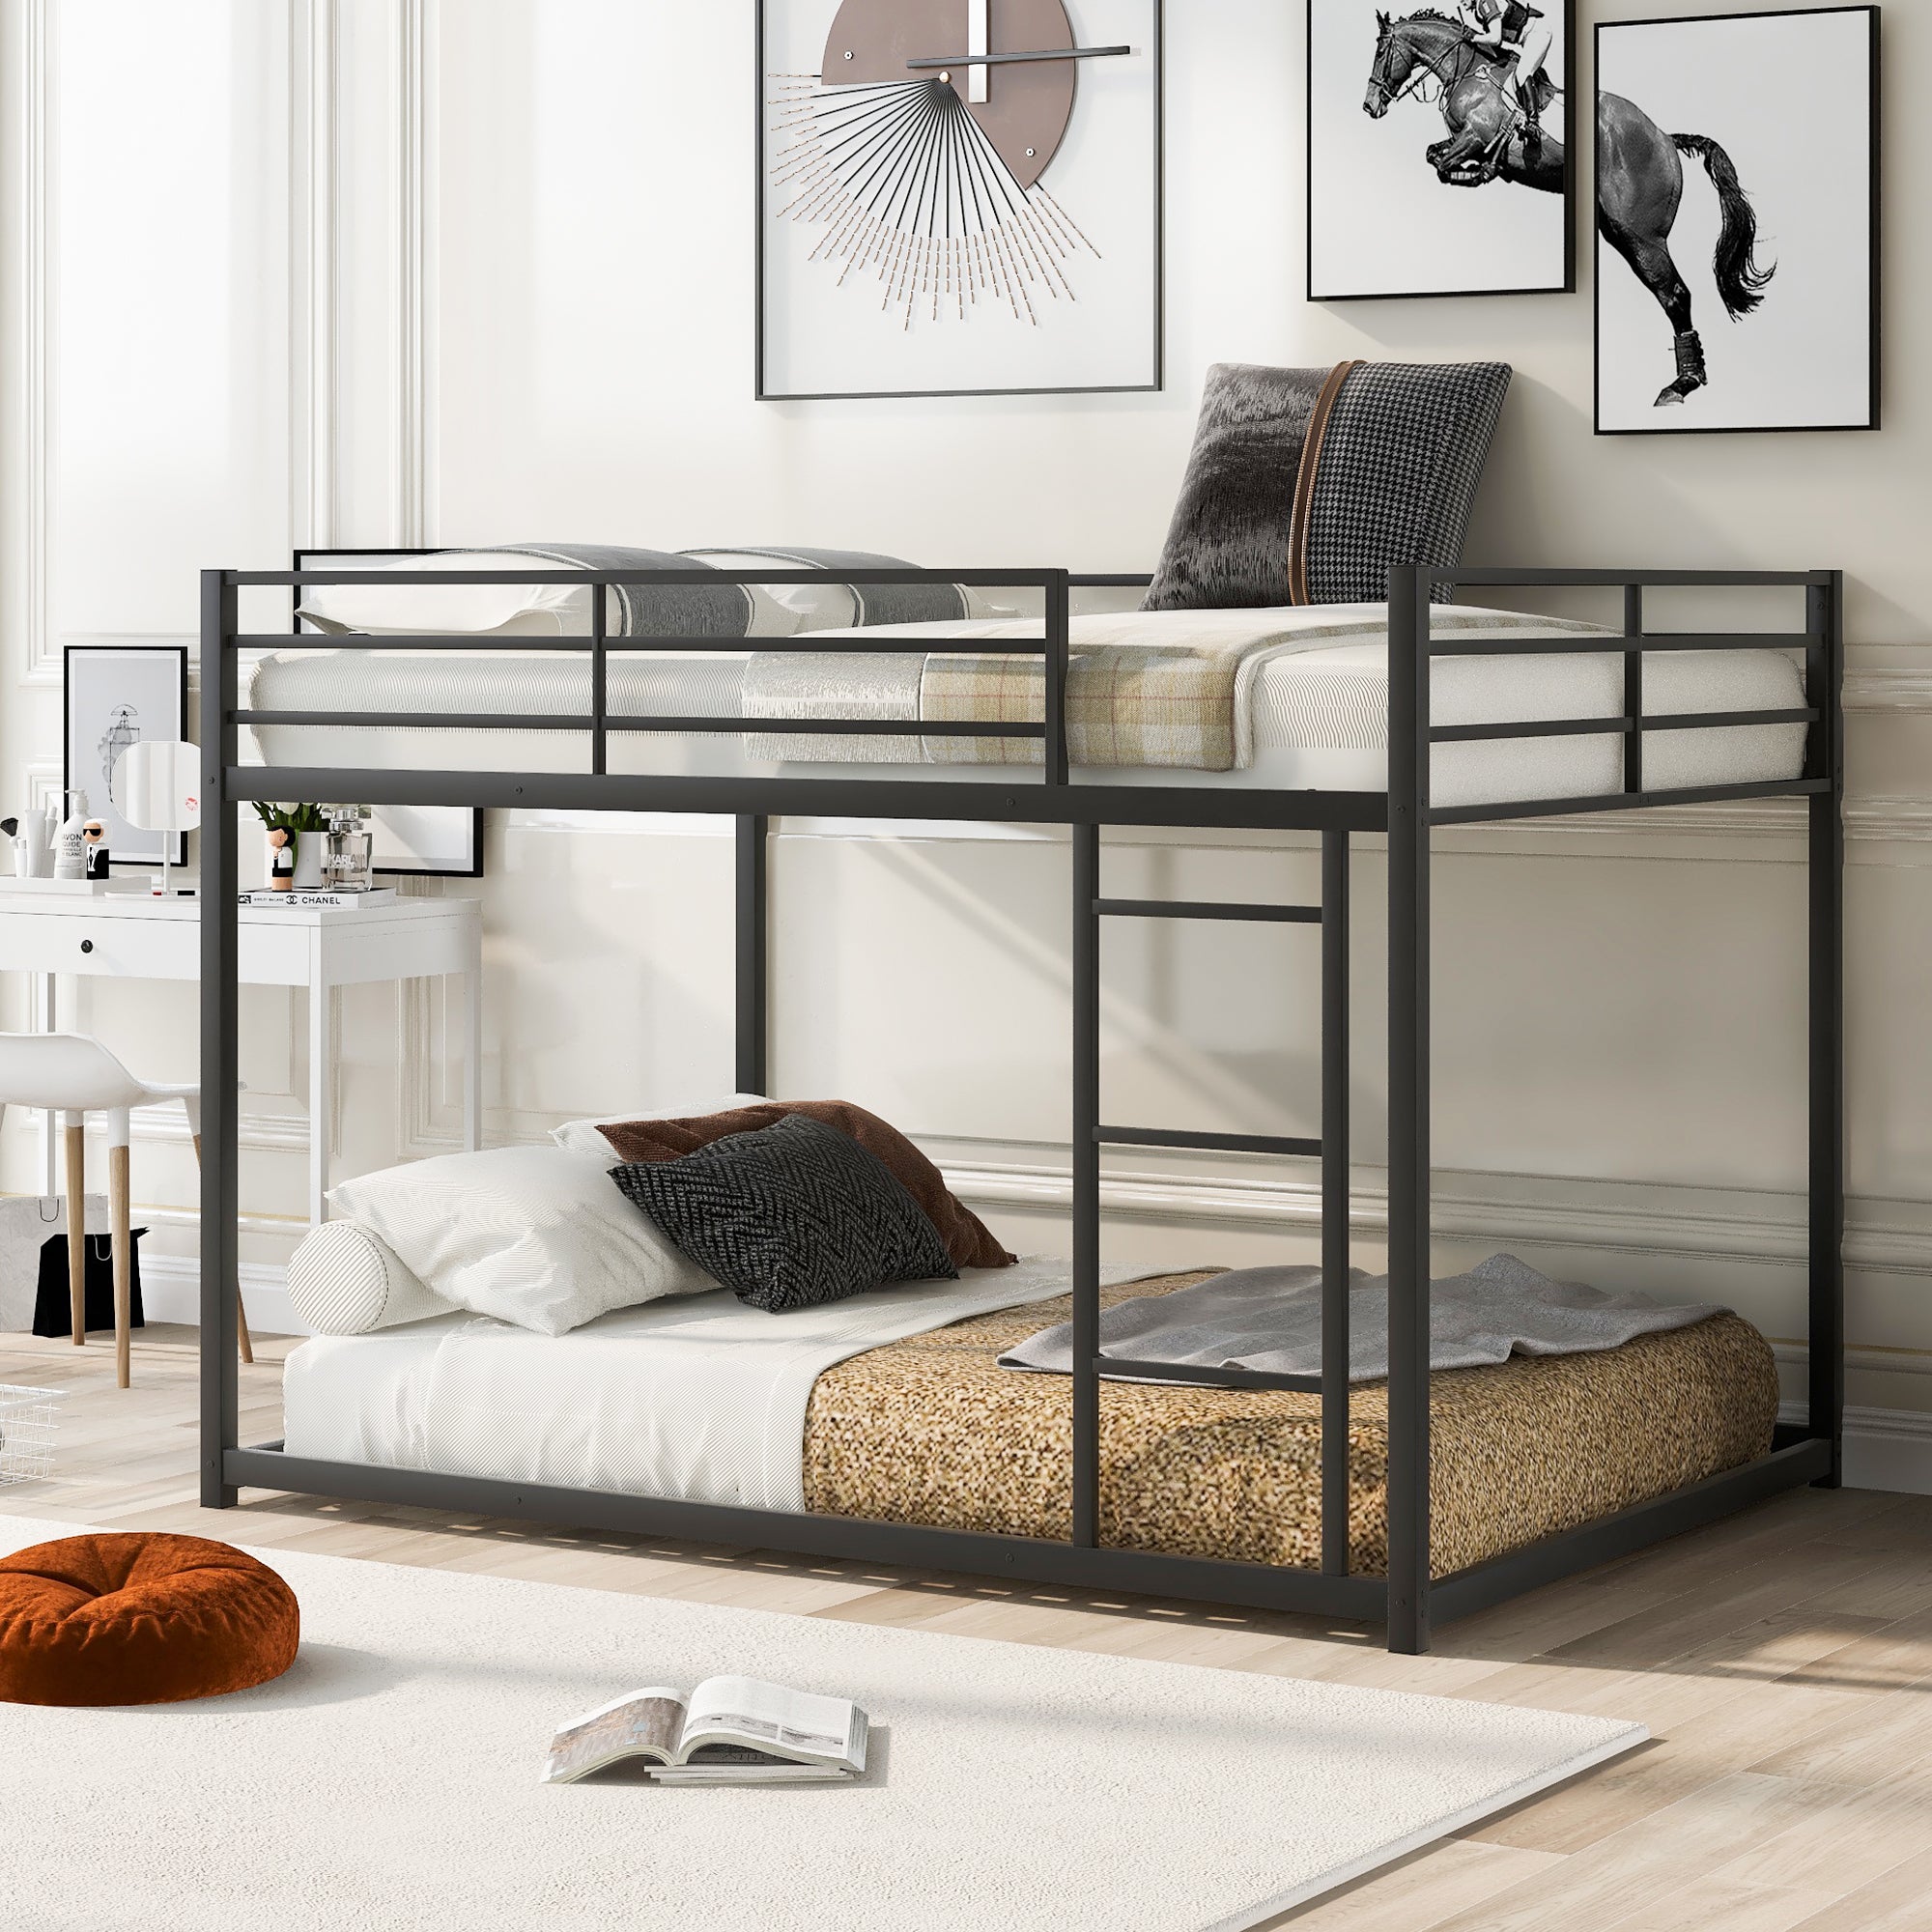 Full over Full Metal Bunk Bed, Low Bunk Bed with Ladder (Black)